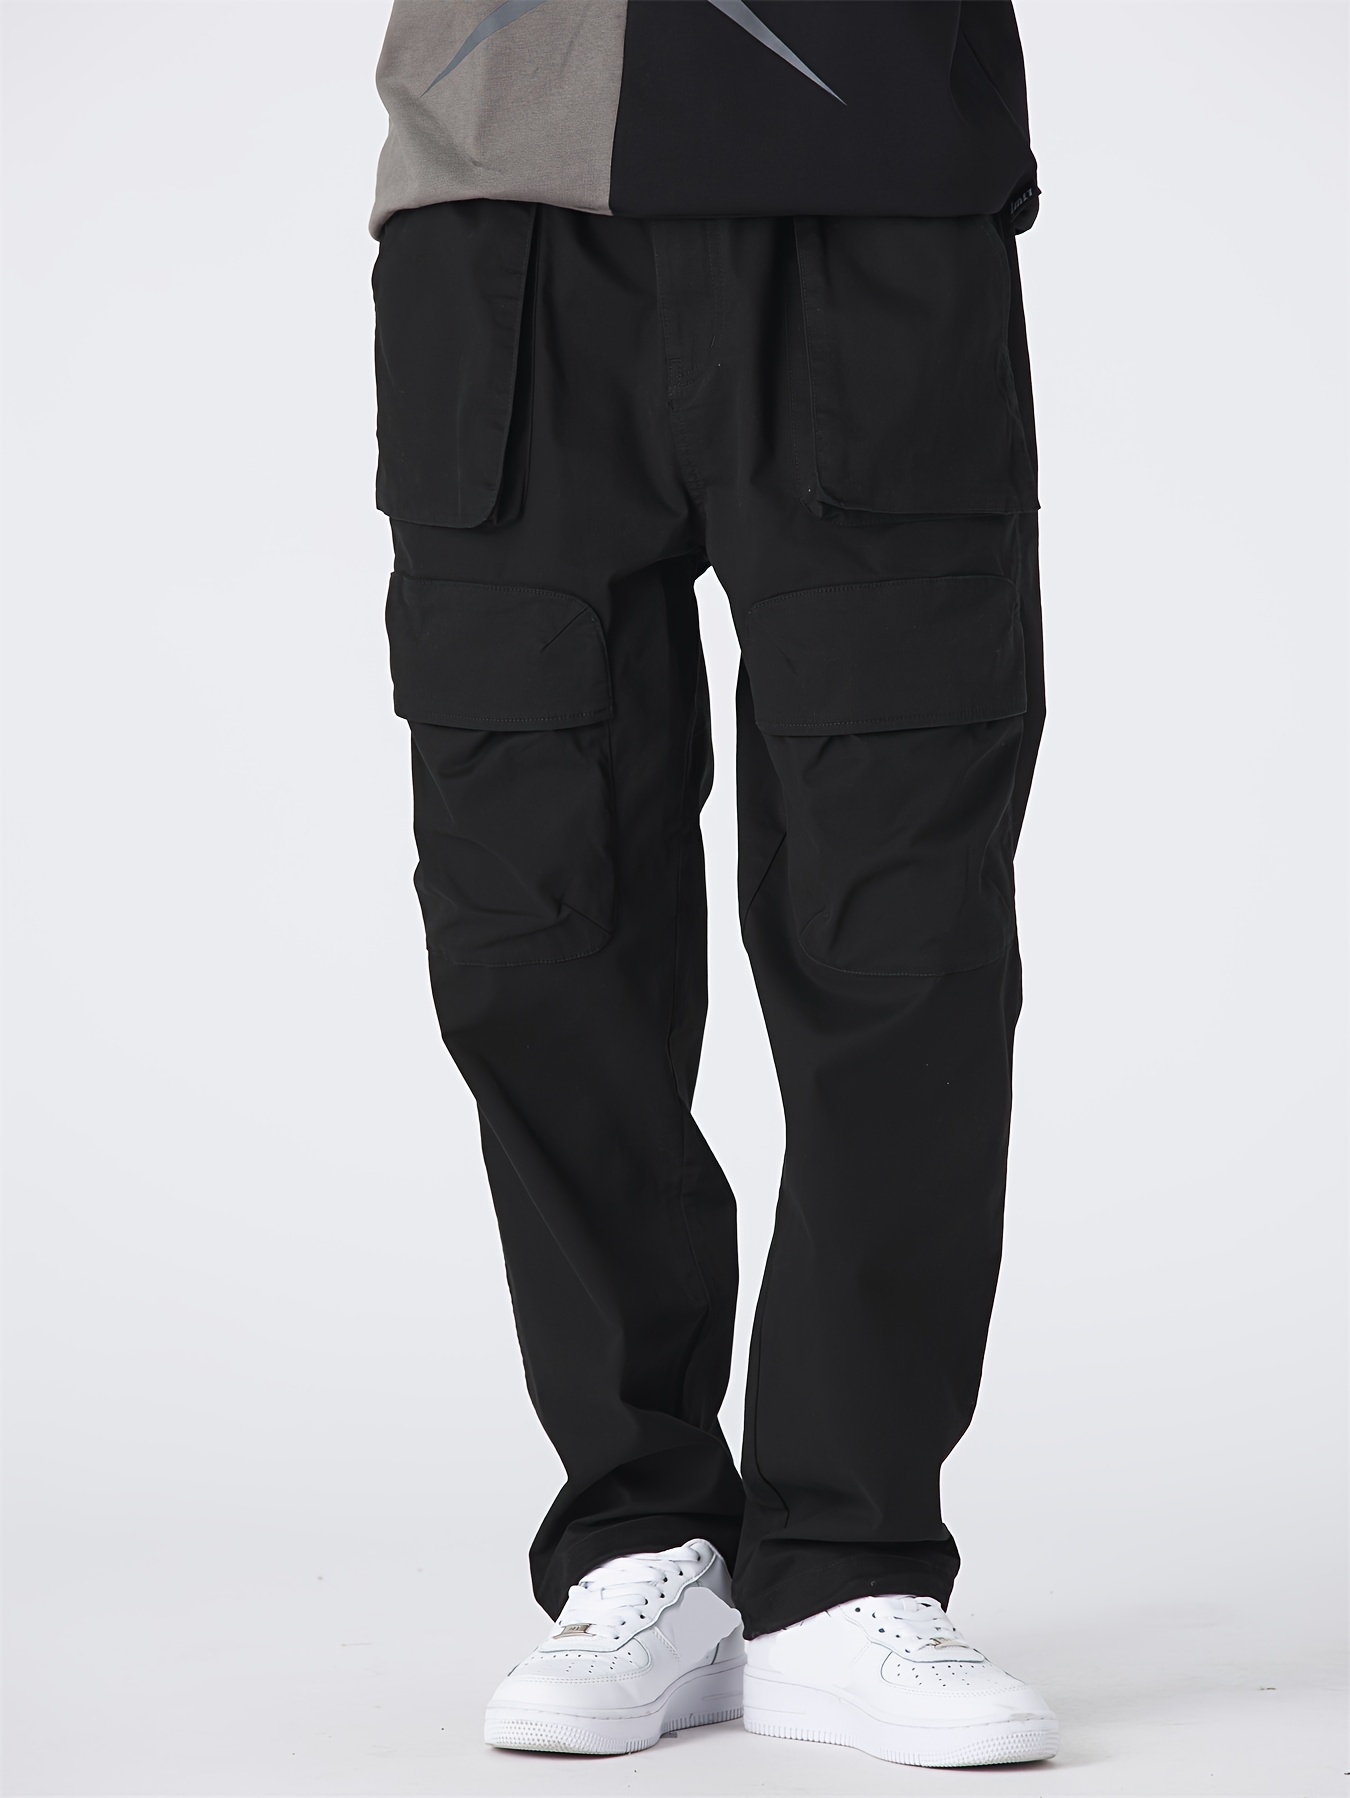 Men Cargo Pants Trousers Straight Bottoms Multi Pockets Outdoor